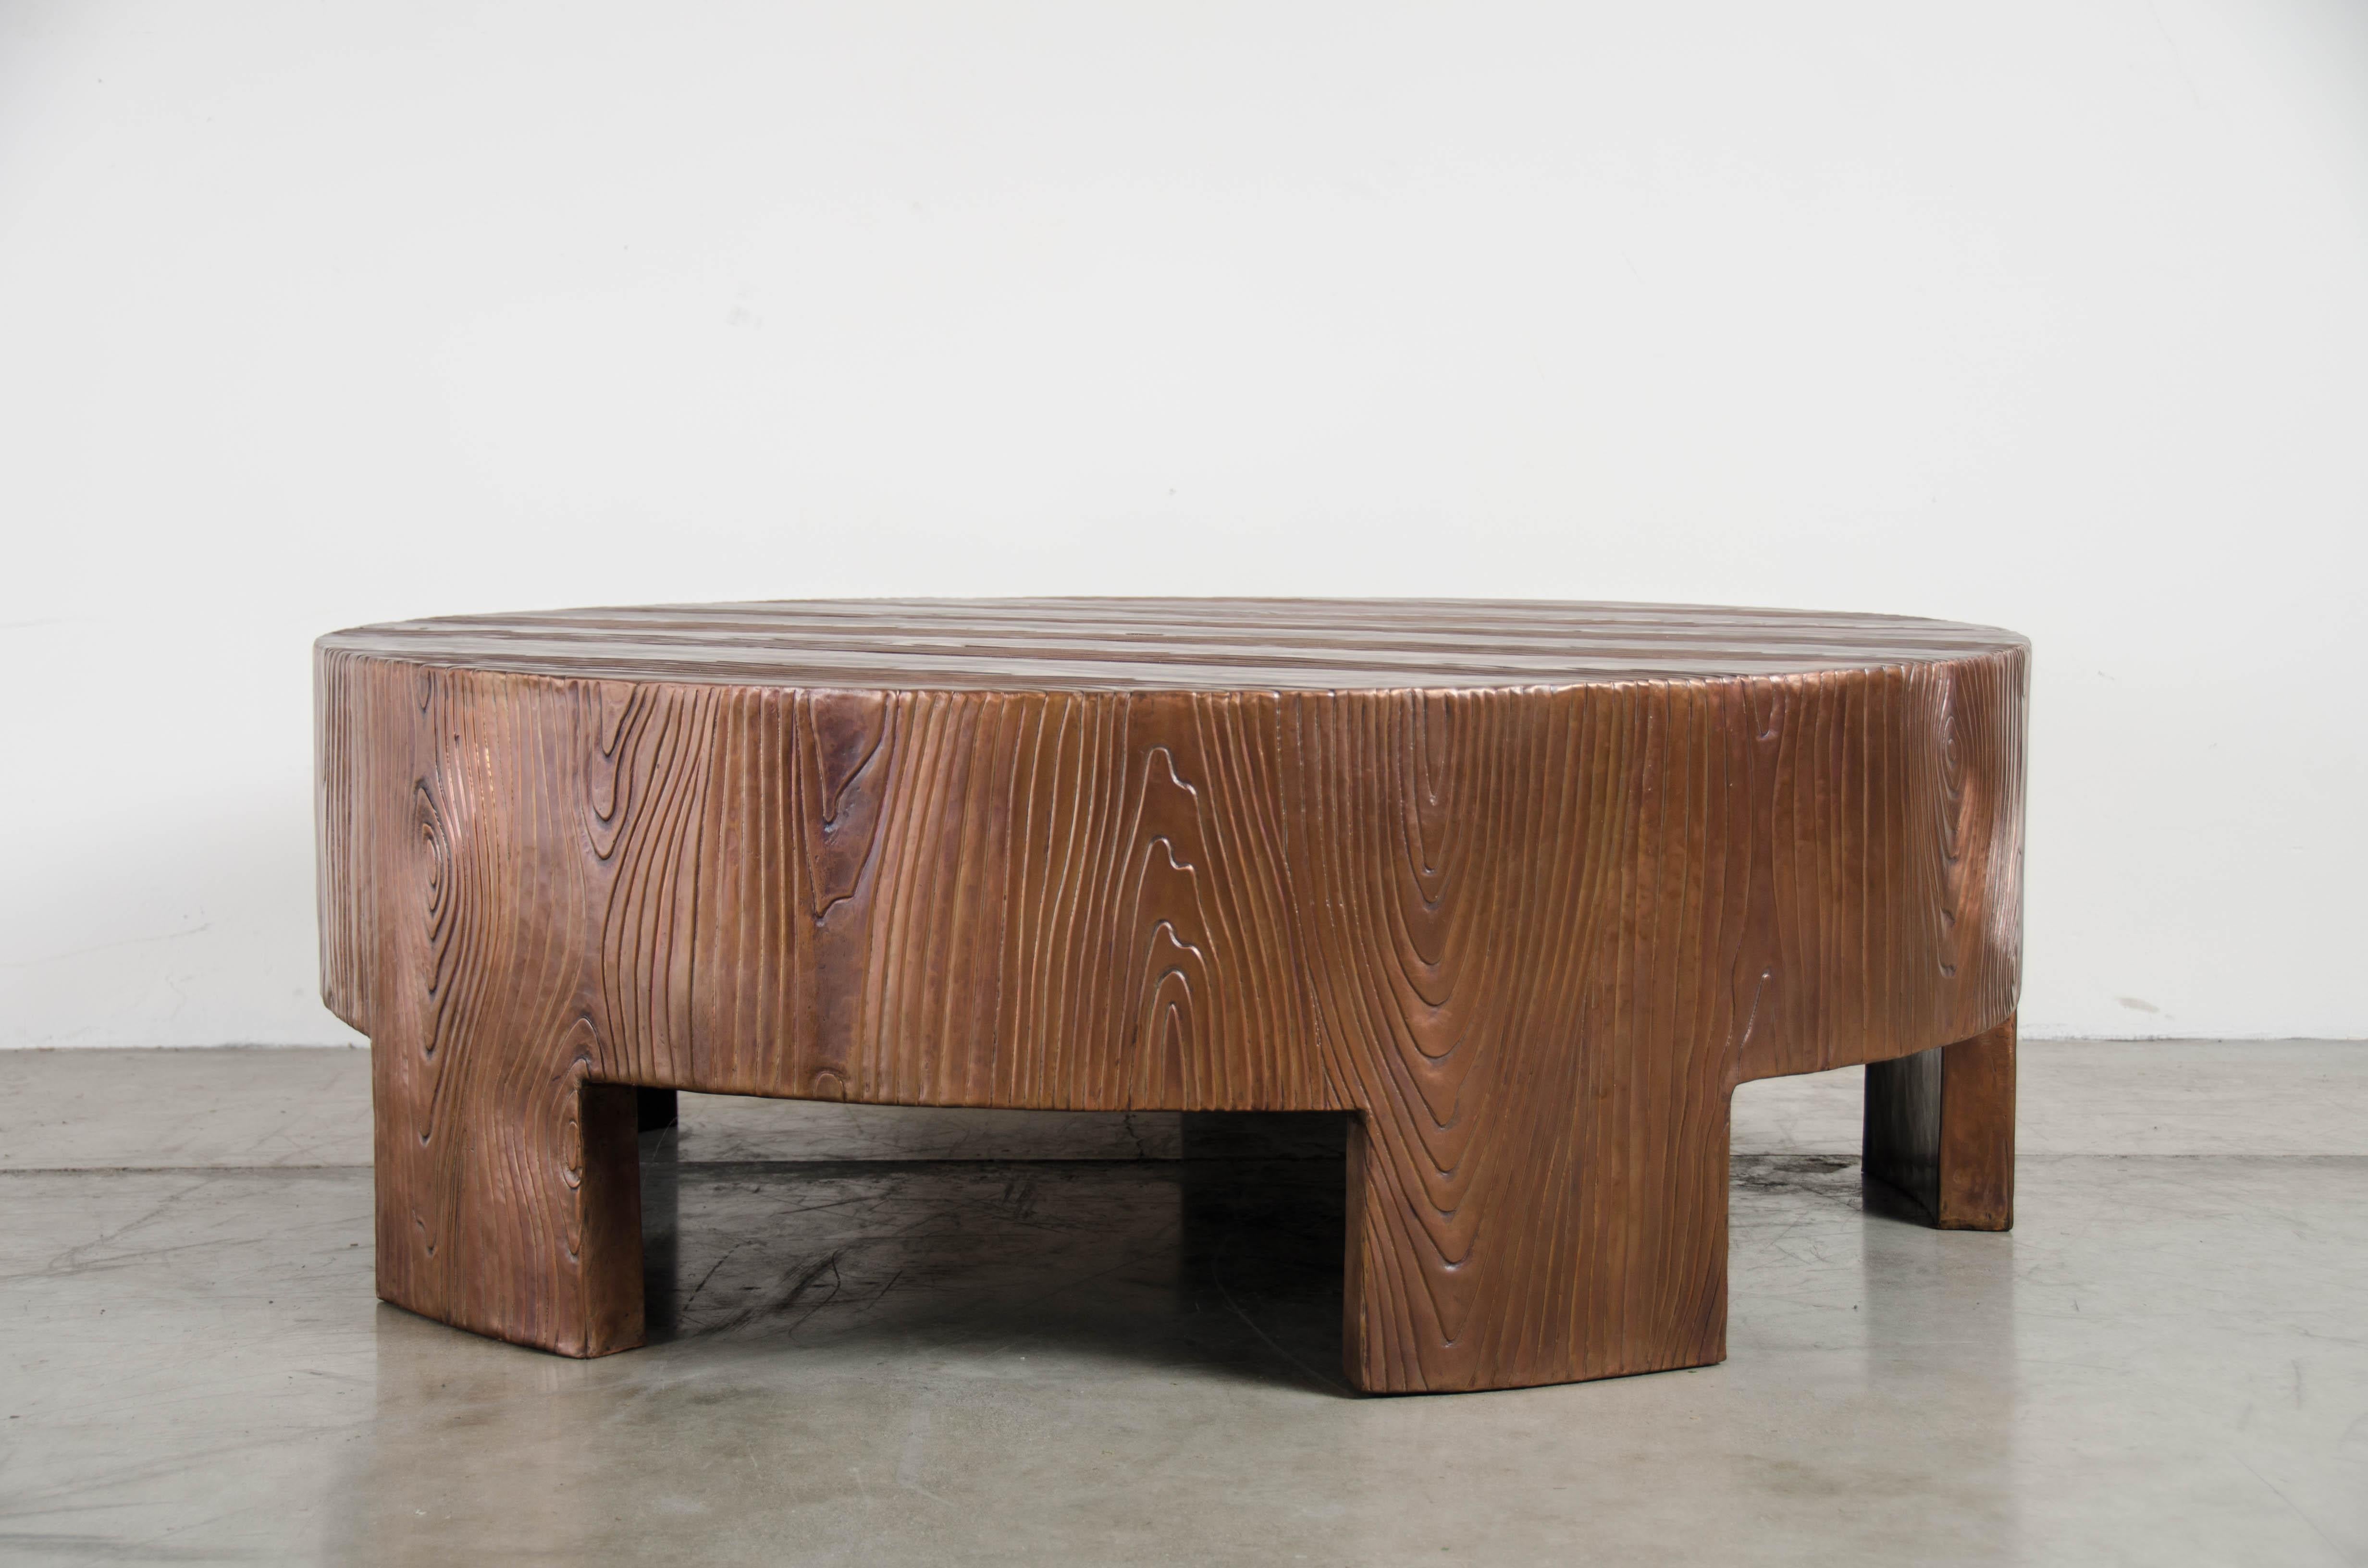 Repoussé Low Round Table, Woodgrain Design, Antique Copper by Robert Kuo, Hand Repousse For Sale